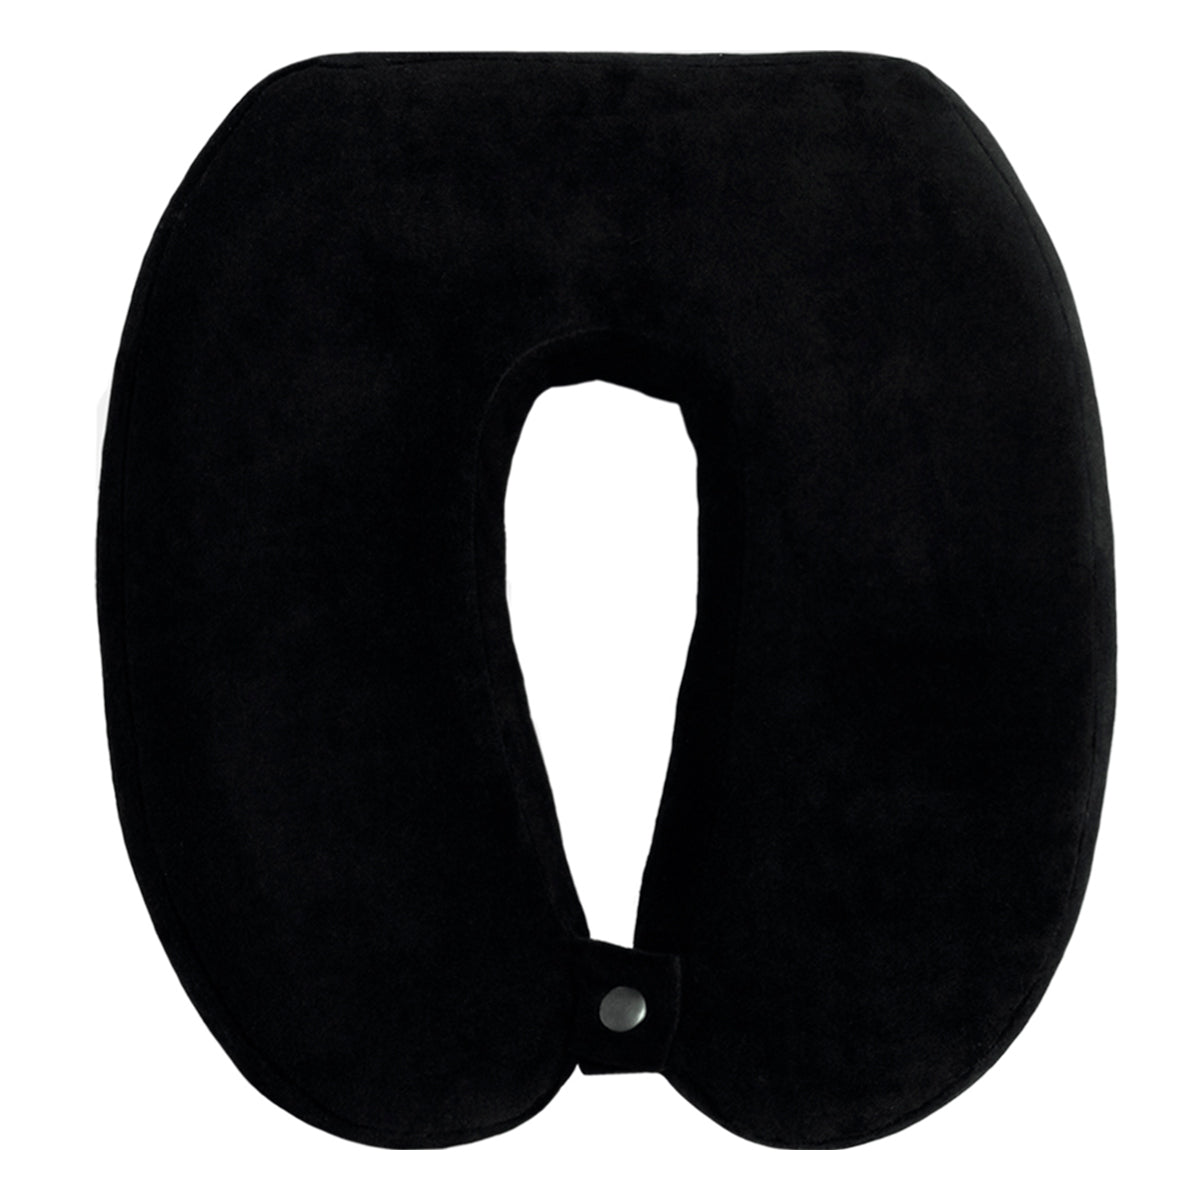 NECK CUSHION WITH ADJUSTABLE CLOSURE 9601 